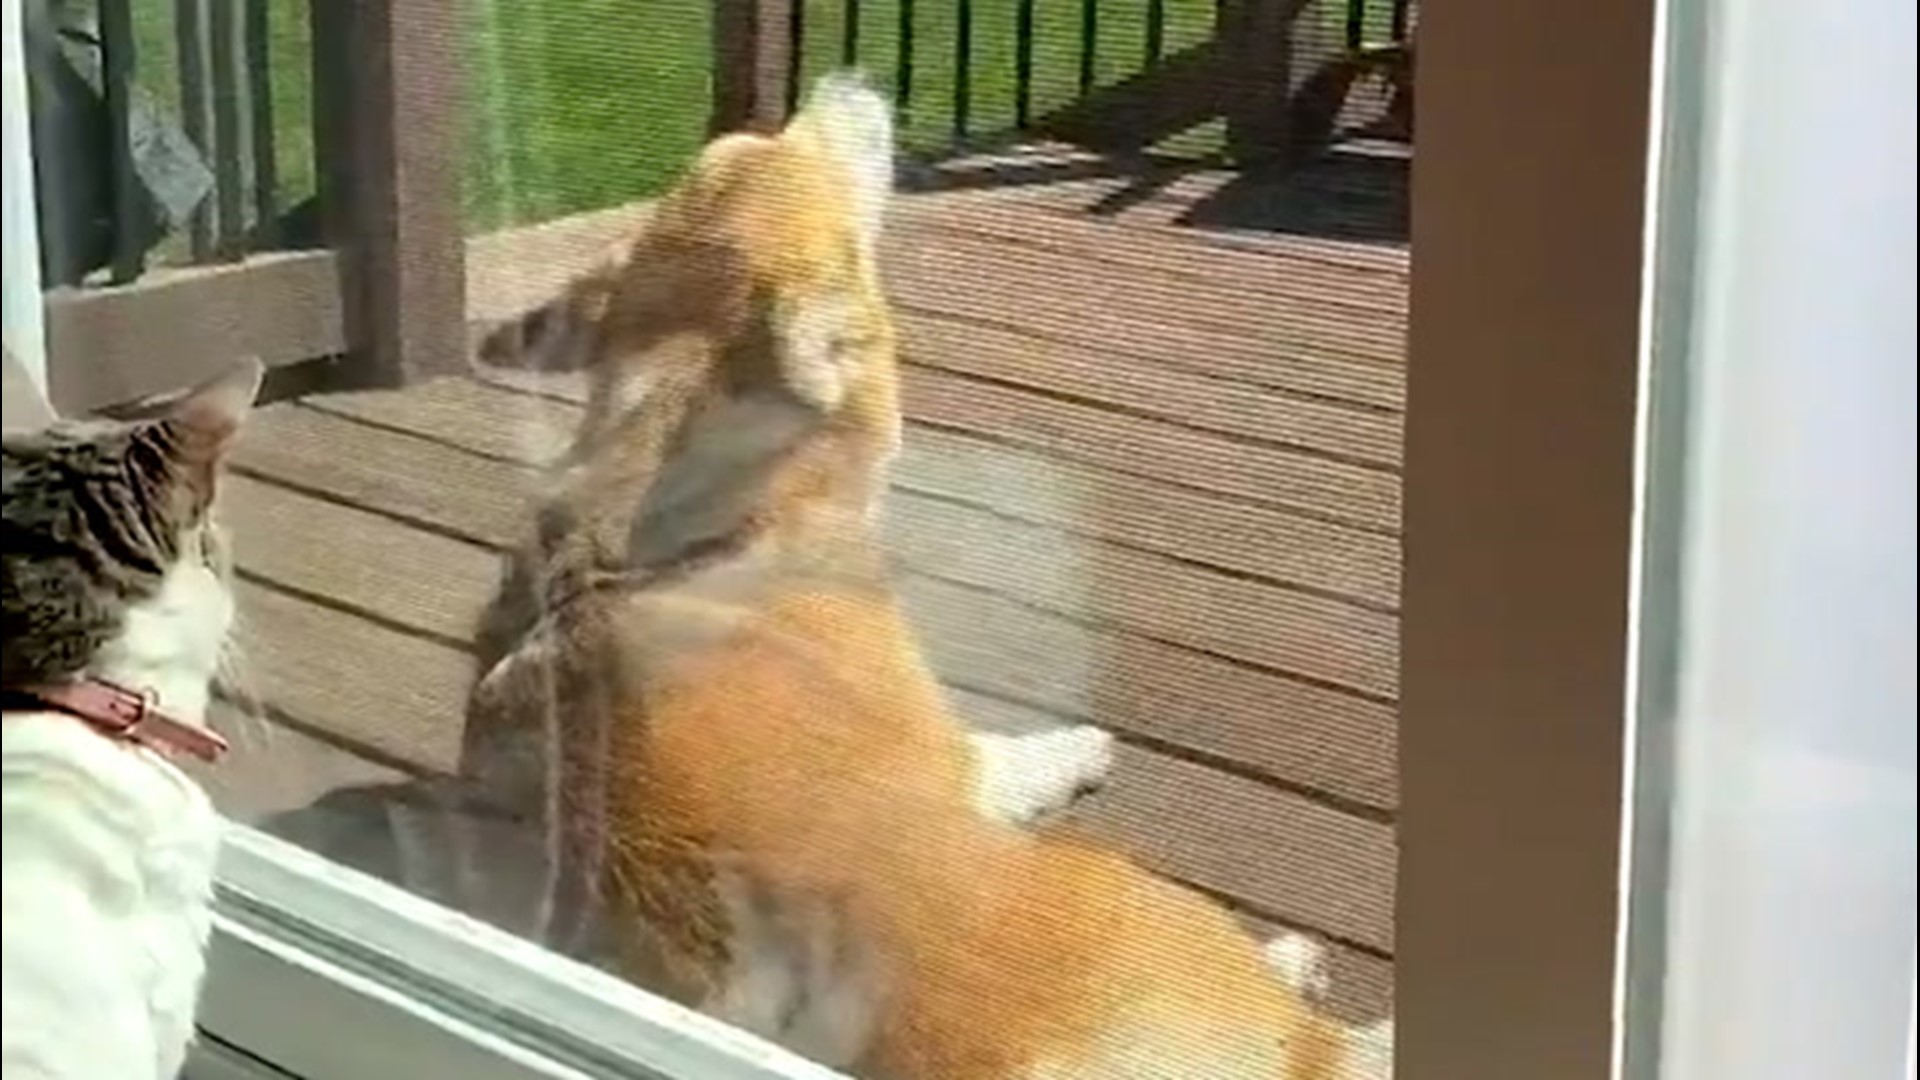 A sunbathing corgi howled along to the tornado sirens in Kansas City, Missouri, as they blared out on May 5.